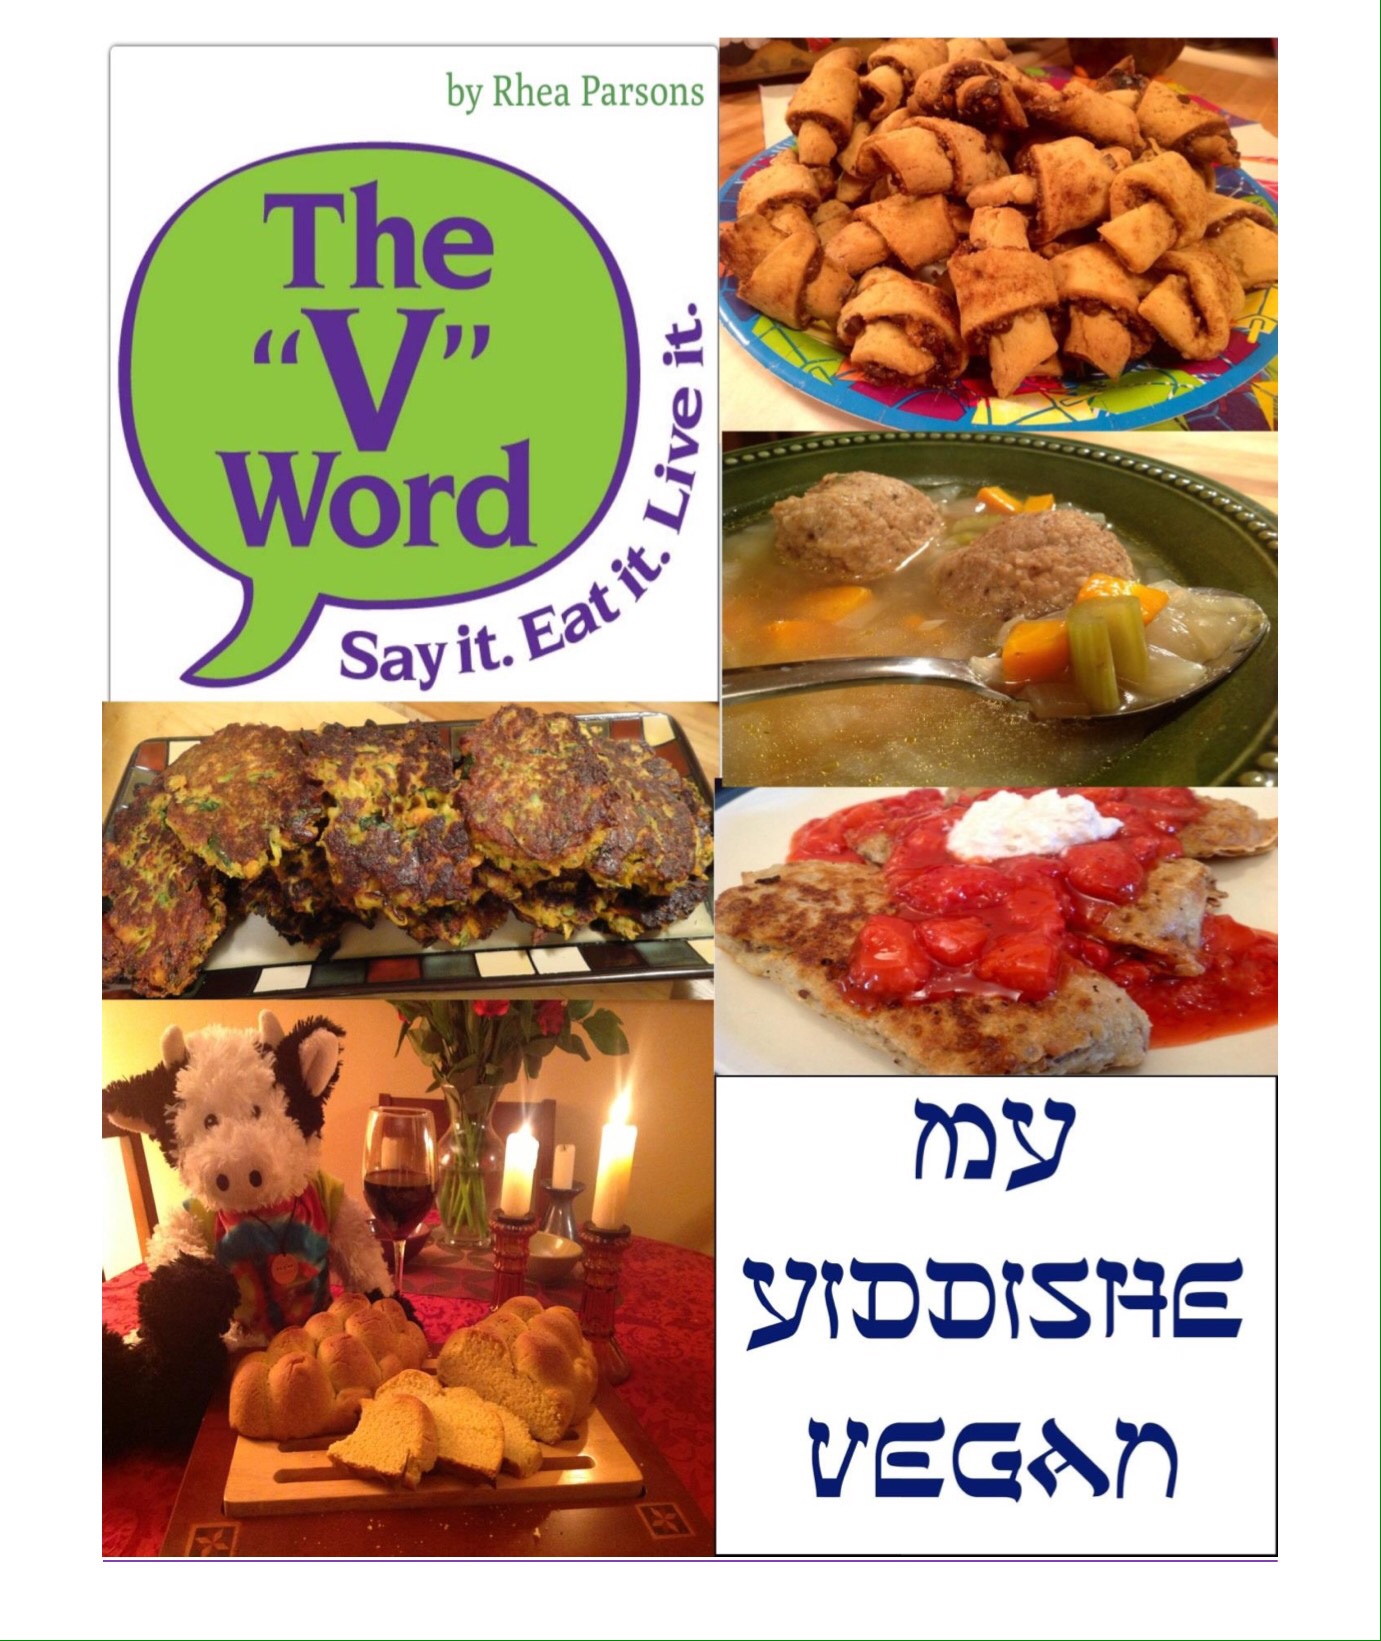 New E-Cookbook My Yiddishe Vegan + Where to Buy Any or All of Them pic